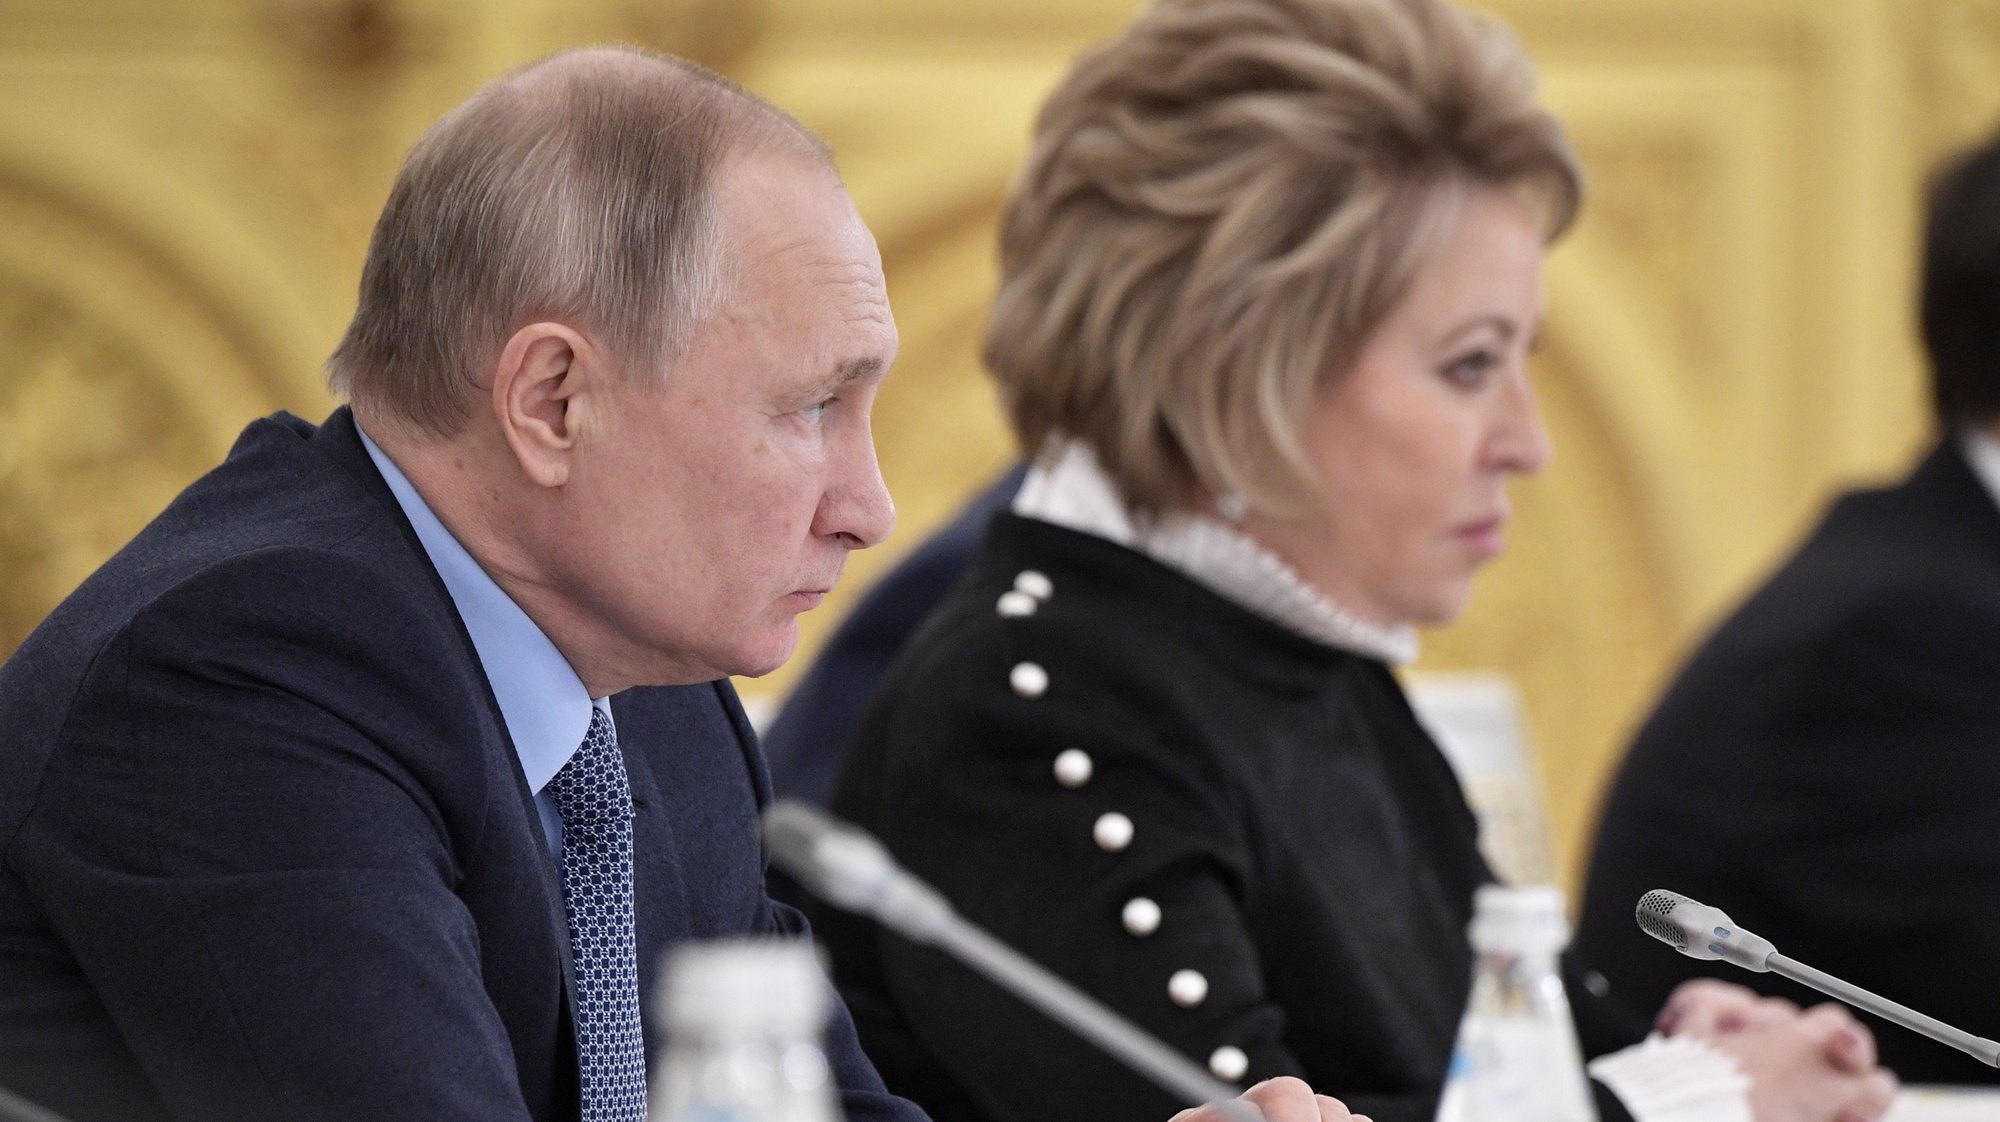 epa08090786 Russian President Vladimir Putin (L) and Russian Federation Council Chairperson Valentina Matviyenko (R) attend a State Council meeting on state agricultural policy at the Kremlin in Moscow, Russia, 26 December 2019.  EPA/ALEXEY NIKOLSKY / SPUTNIK / KREMLIN POOL MANDATORY CREDIT